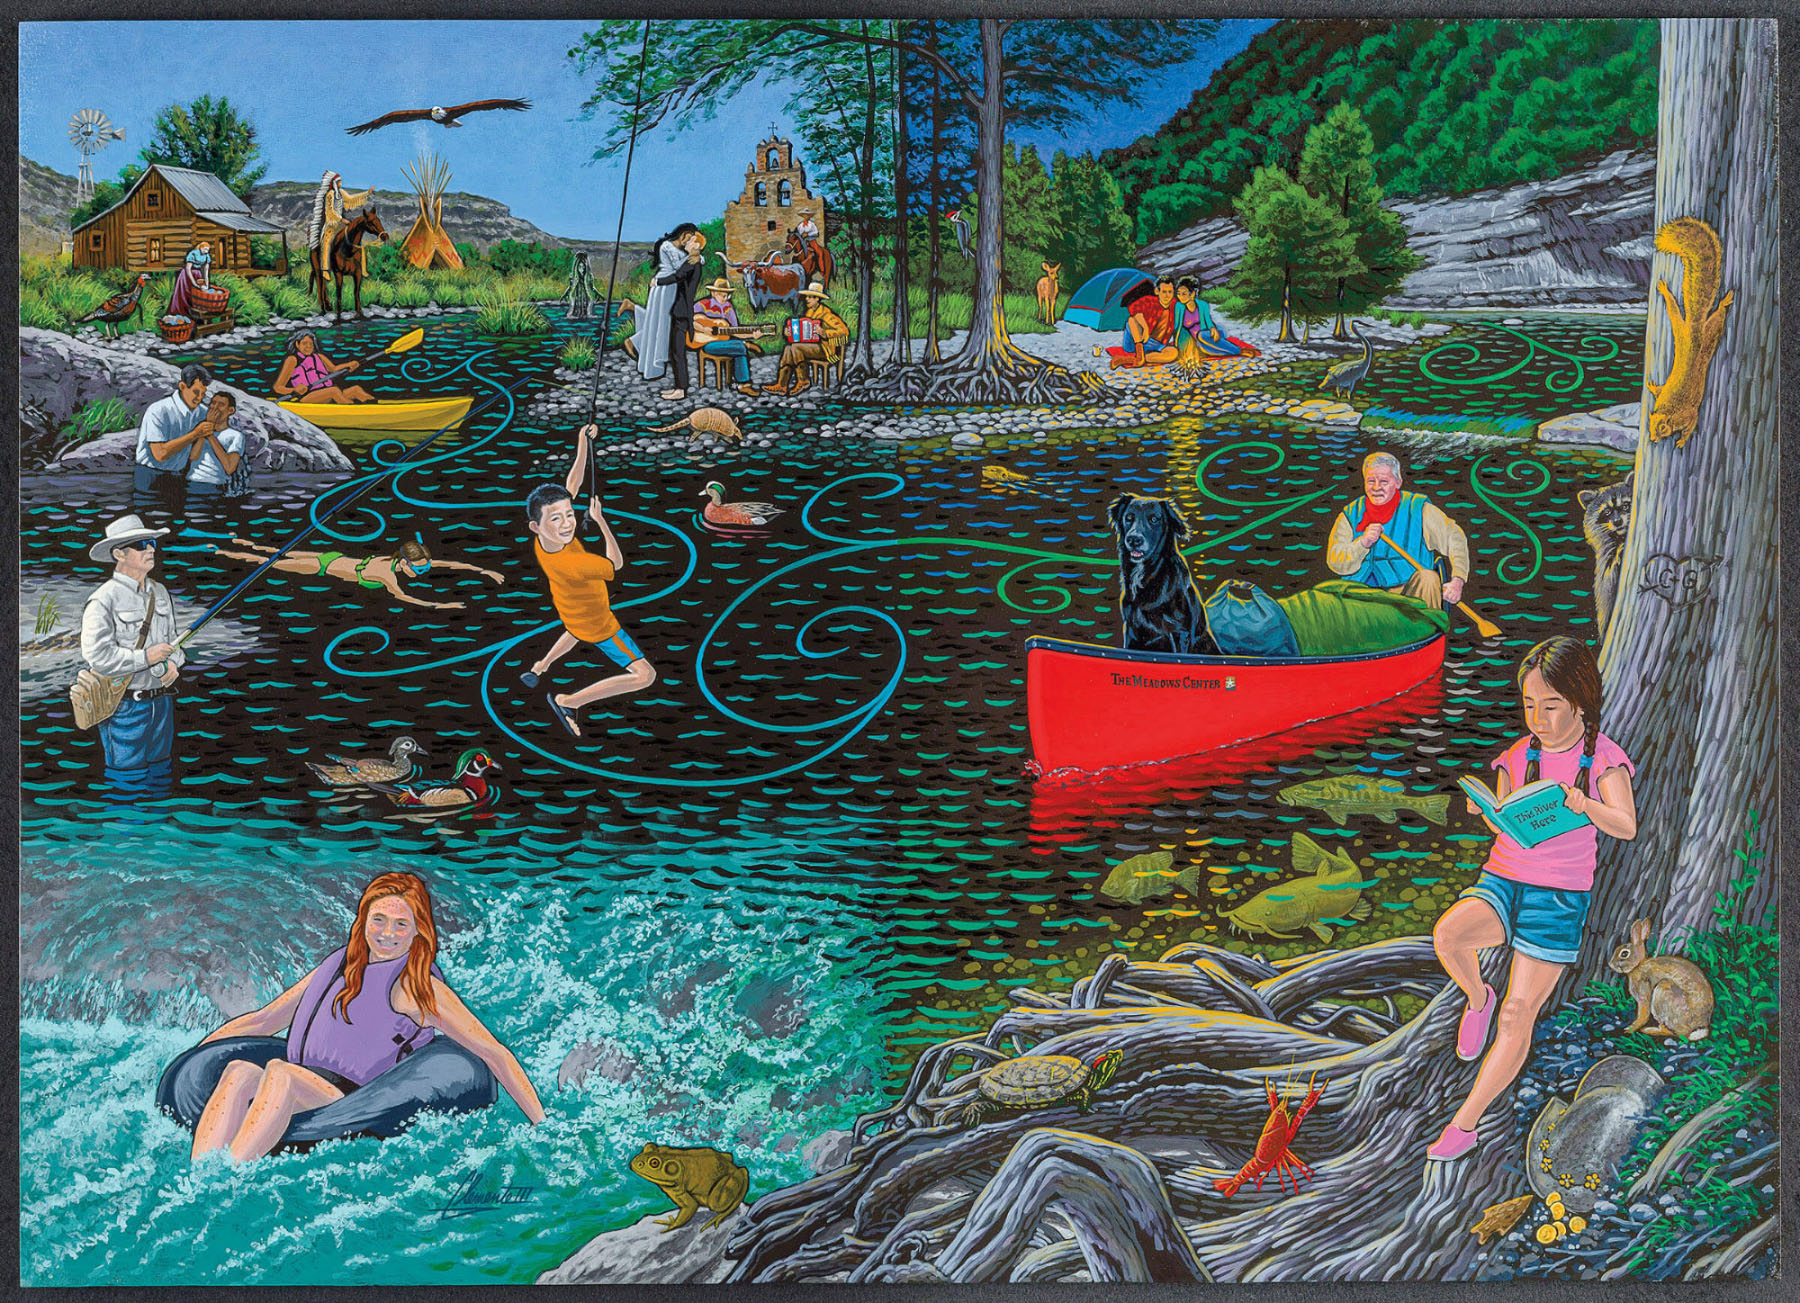 An illustration showing people canoeing, fly fishing, hanging from a rope swing, camping and reading a book near a river